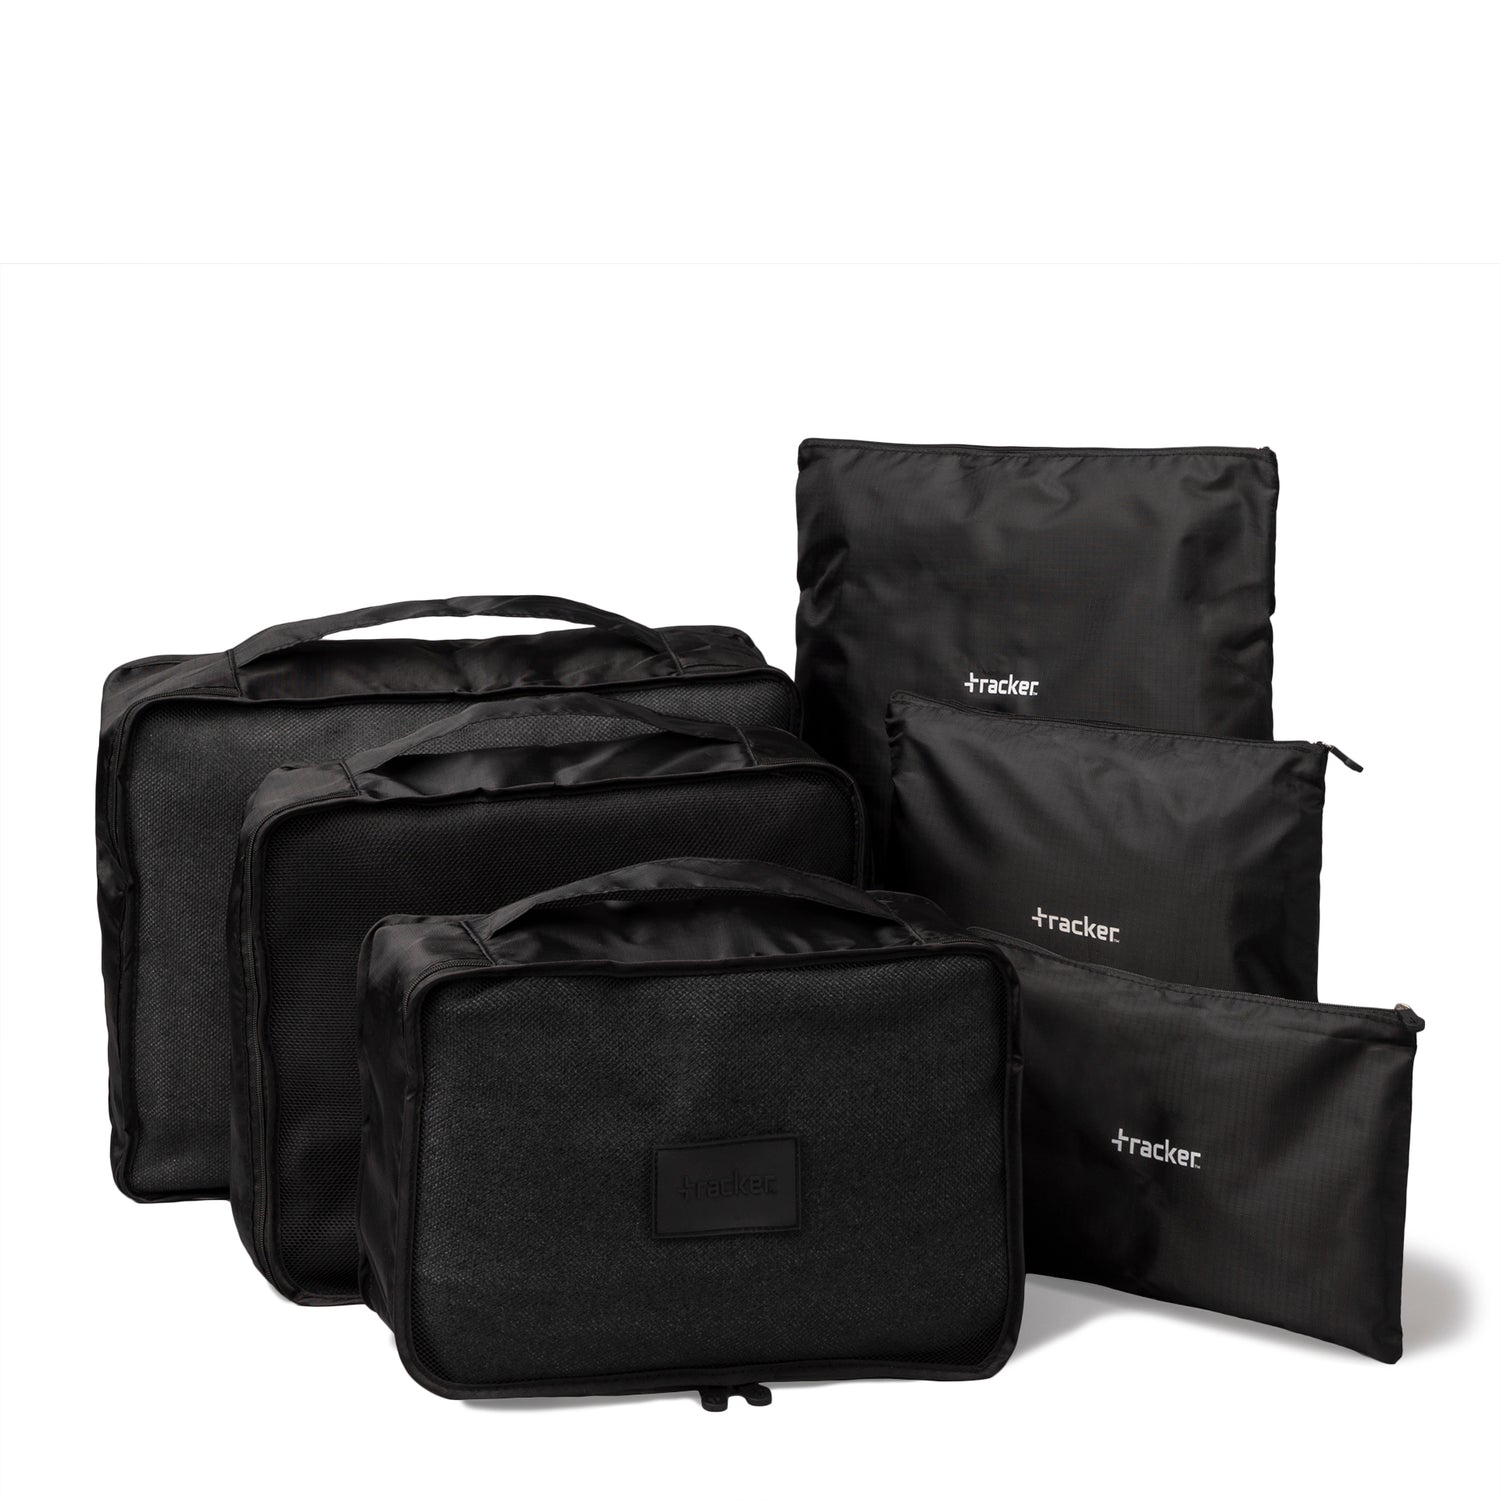 3 Packing Cubes and 3 Storage Bags -  - 

        Tracker
      
